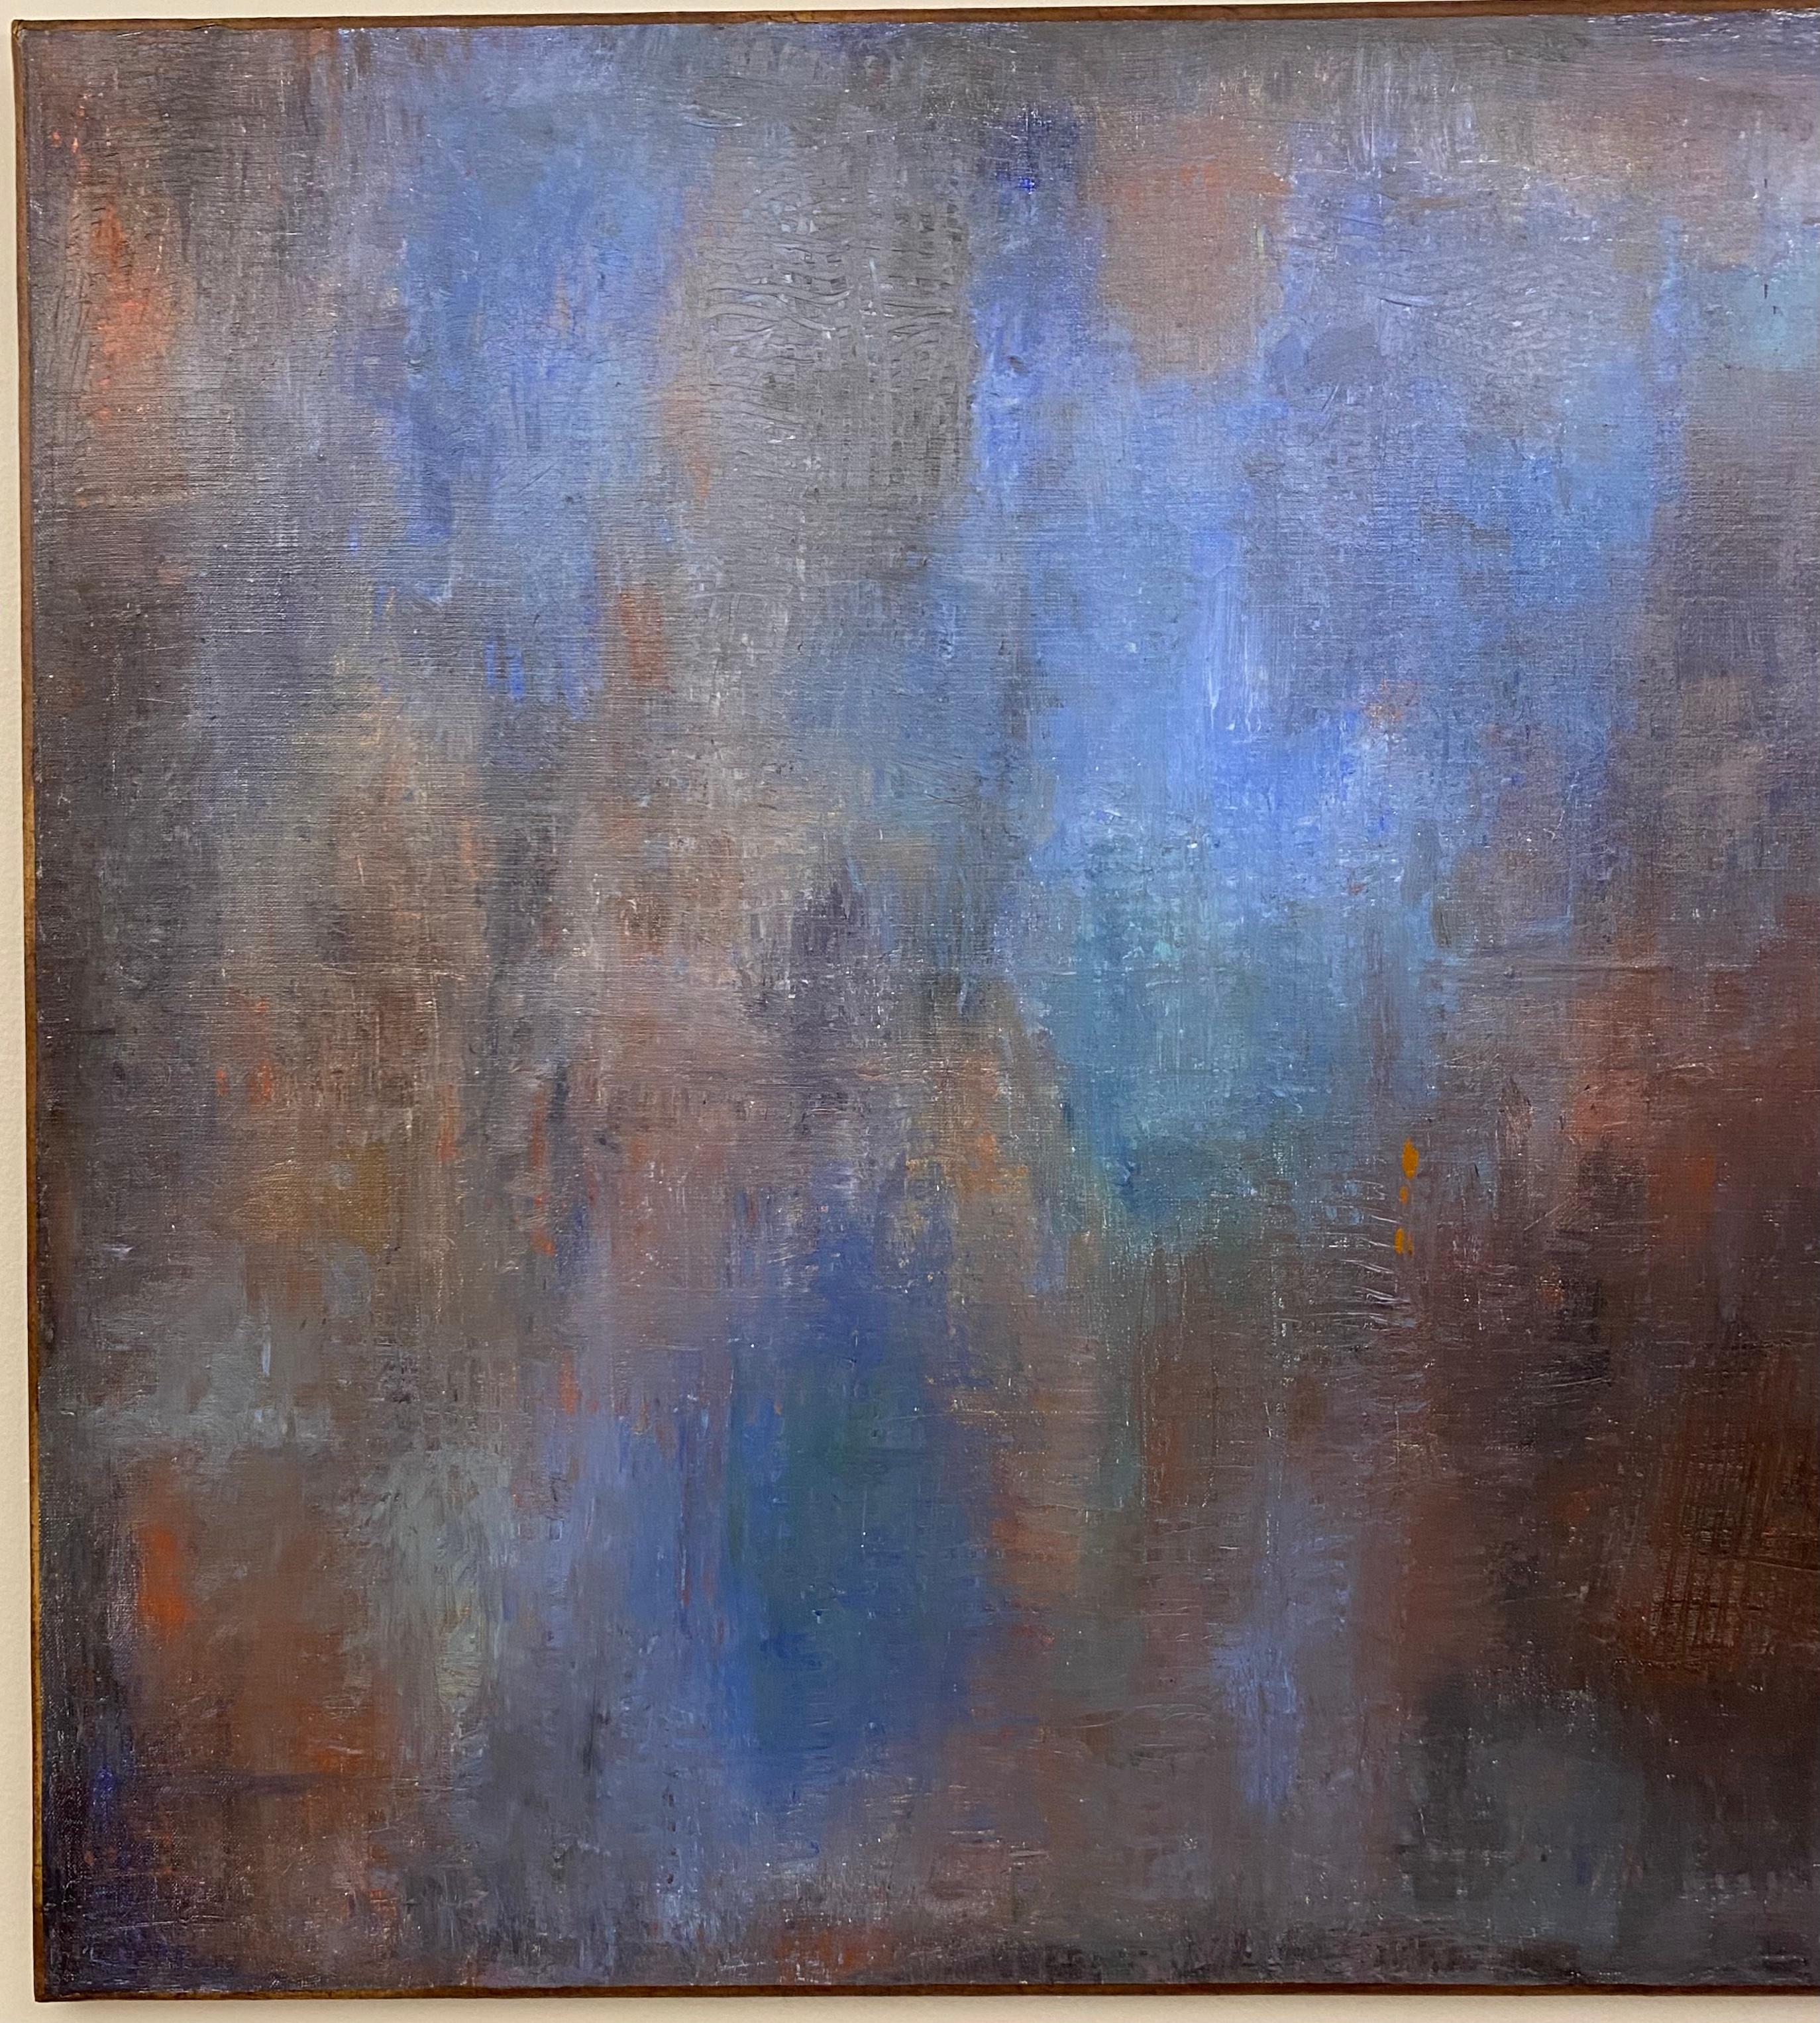 Hand-Painted Large Blue Abstract Oil on Canvas Painting by C. Azuelos For Sale